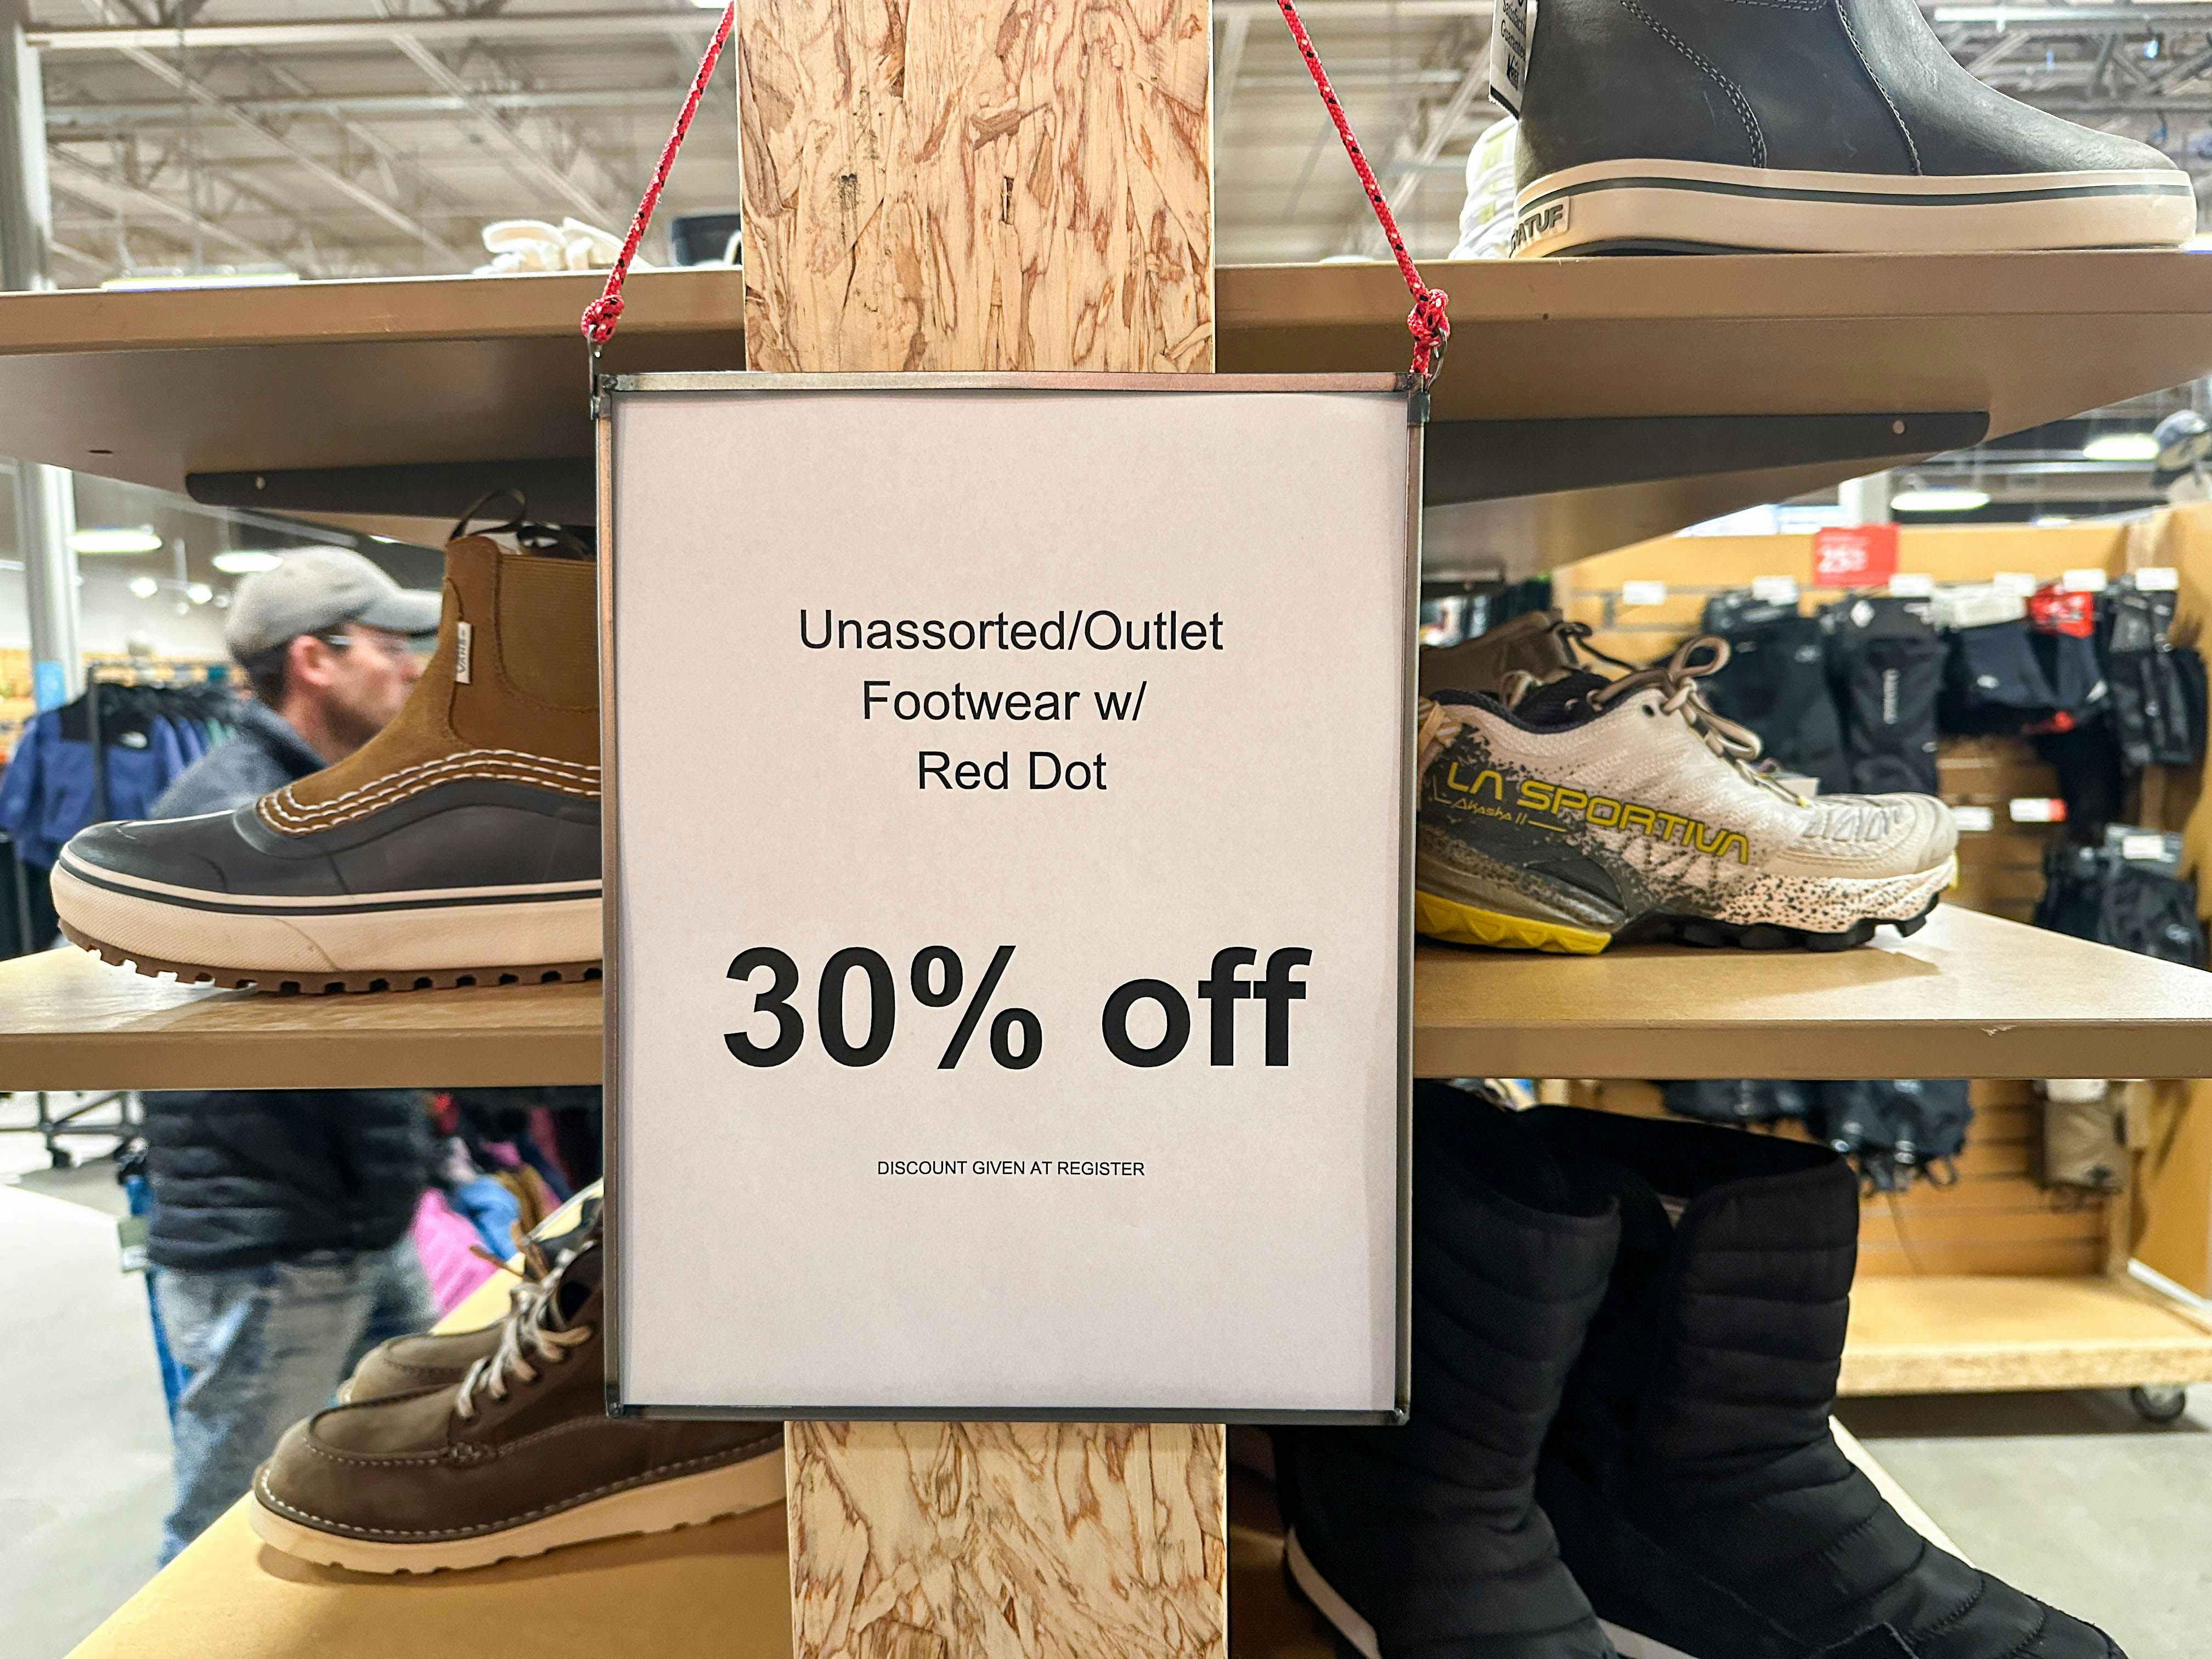 outfit sale sign in rei 